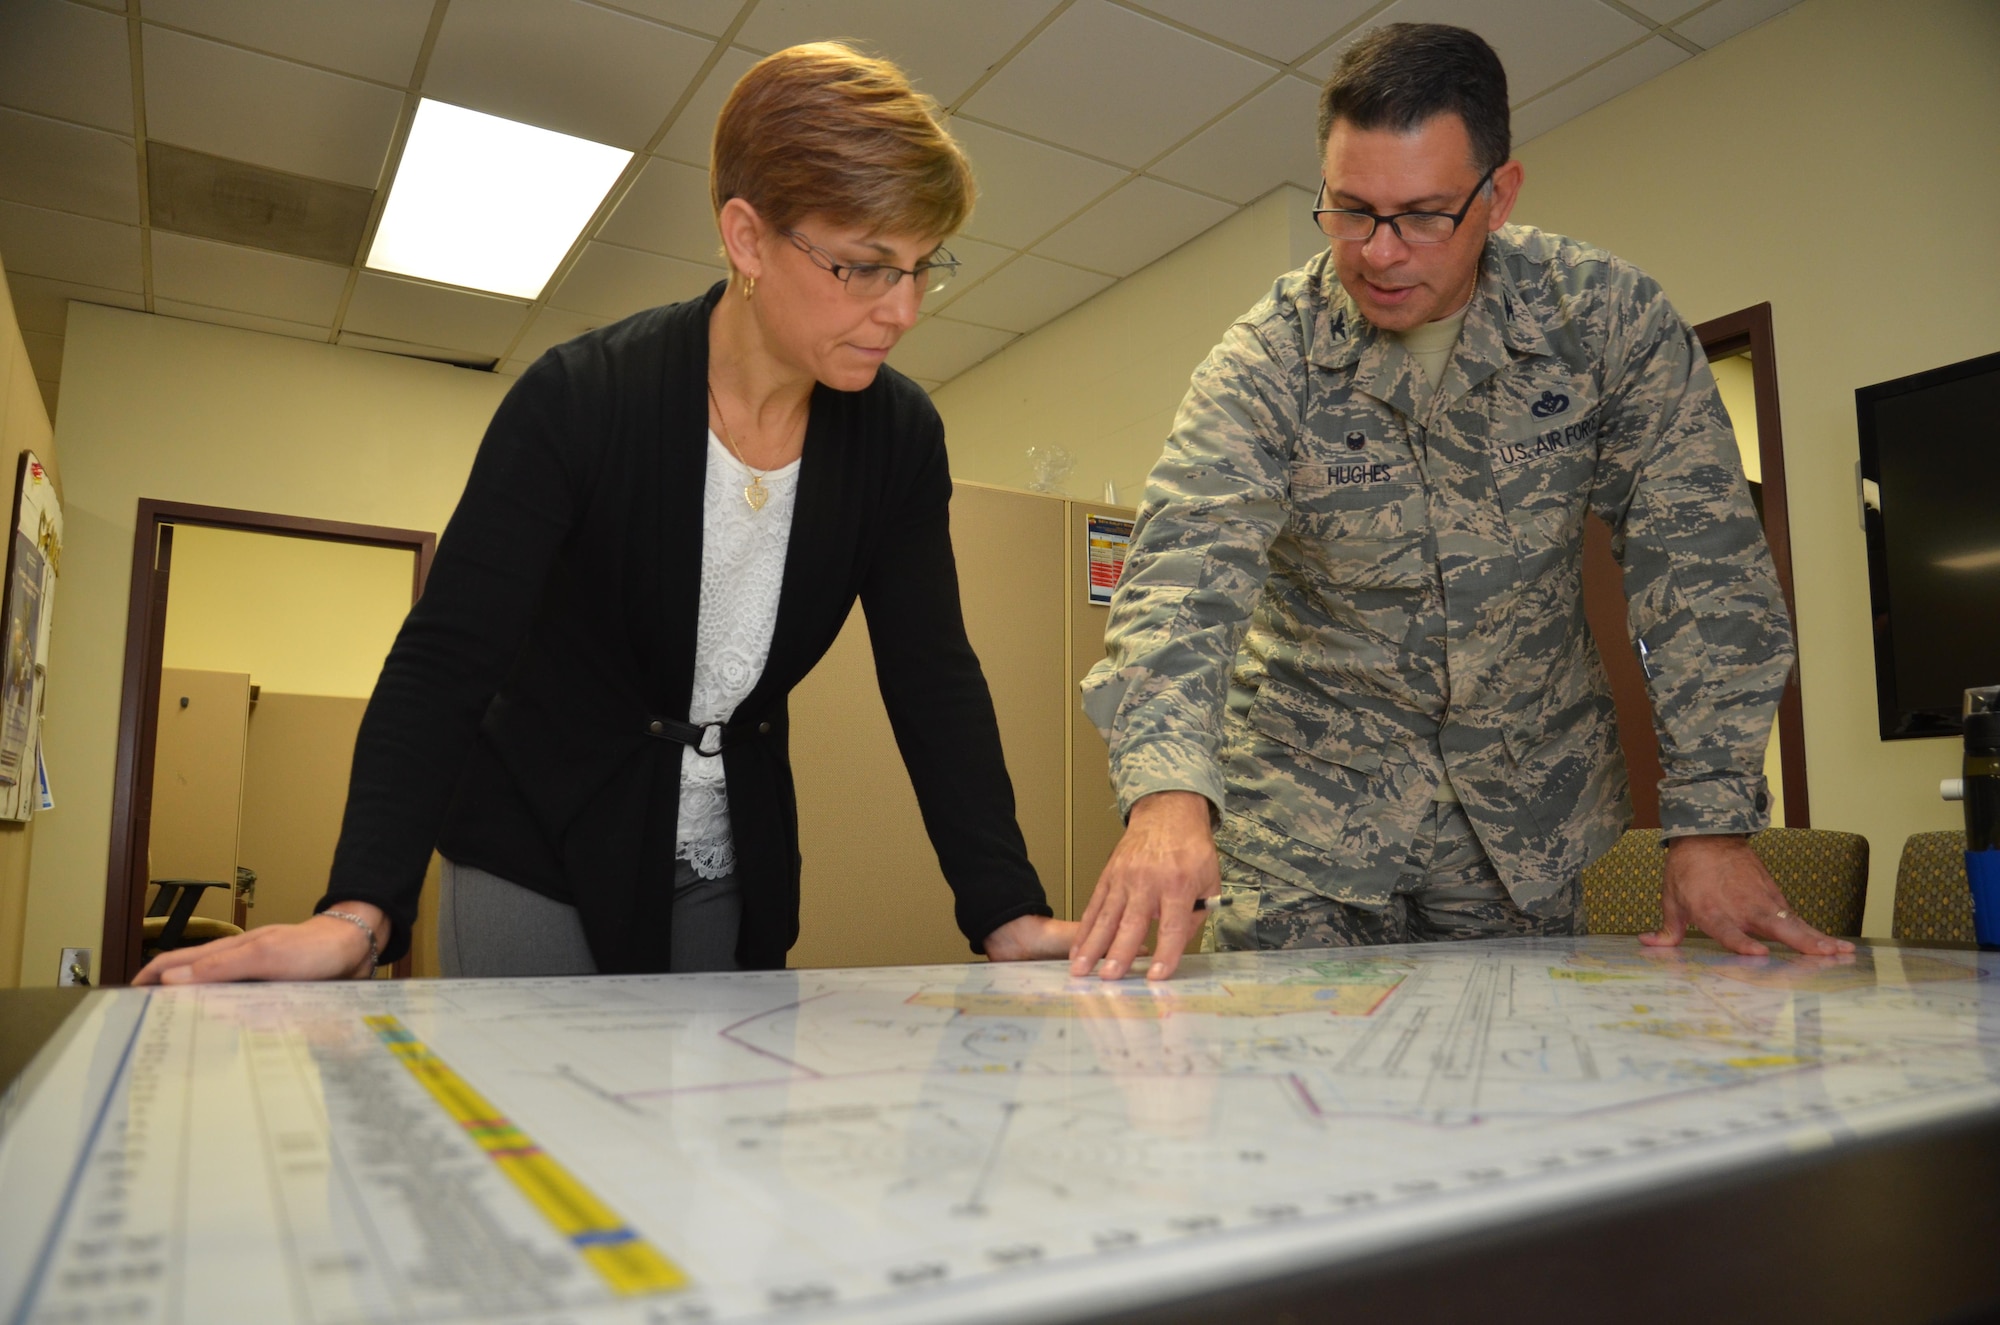 Mrs. Jill La Fave, spouse of Maj. Gen. Craig La Fave, 22nd Air Force commander, looks at a base map with Col. Marty Hughes, 94th Mission Support Group commander, at Dobbins Air Reserve Base, Georgia Dec. 2, 2017. The La Faves and Chief Master Sgt. Clinton Ronan, 22nd AF command chief, visited Reserve Citizen Airmen at the 94th Airlift Wing here during the December drill weekend. (U.S. Air Force photo by Senior Airman Lauren Douglas)